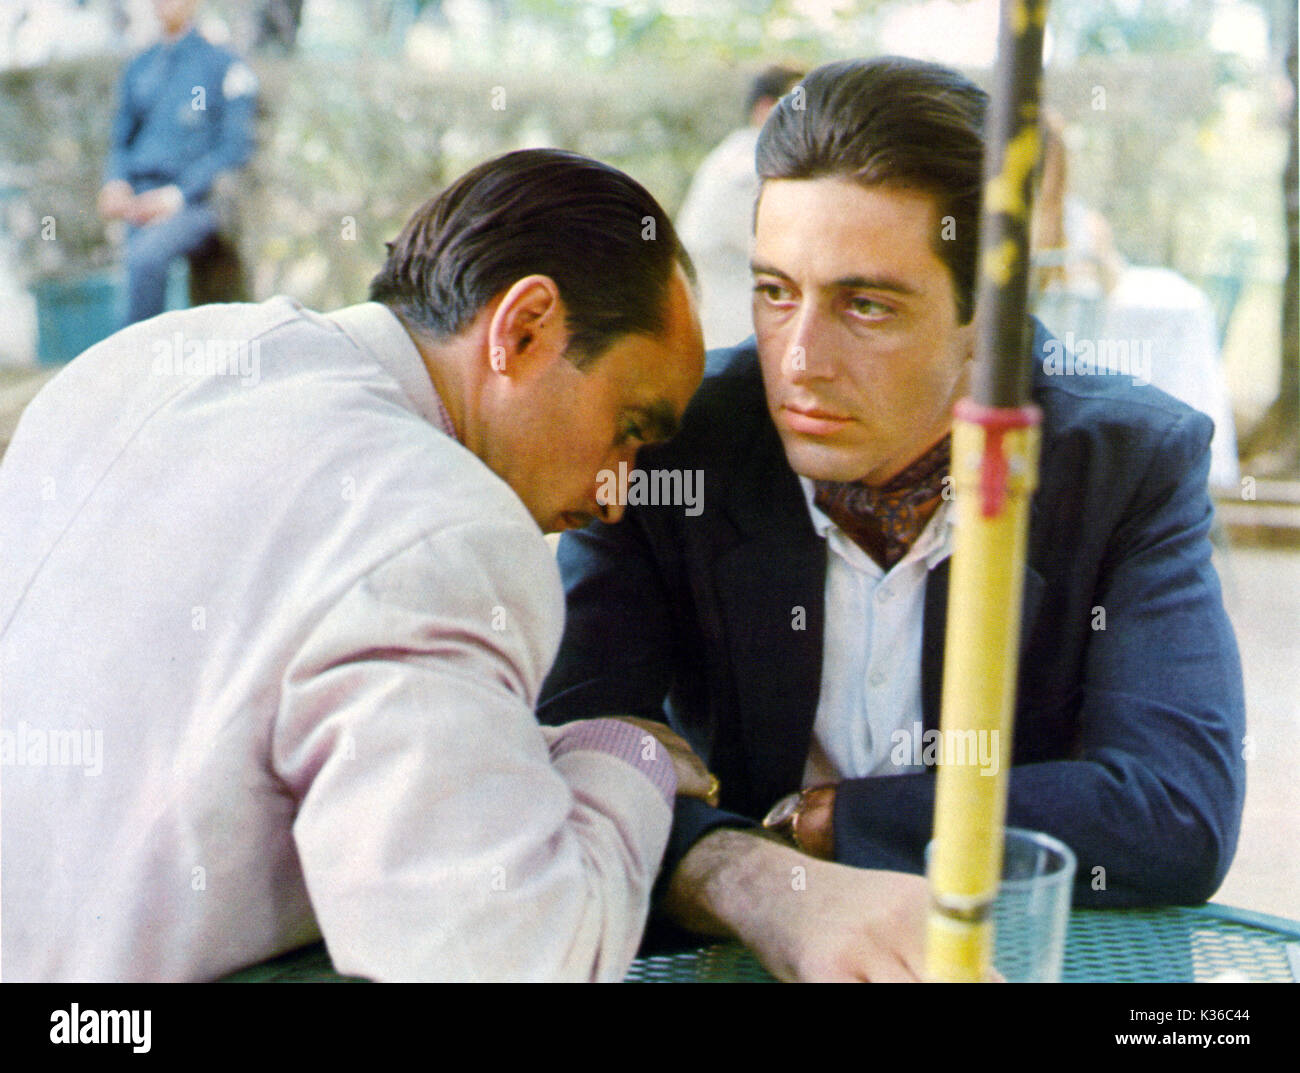 THE GODFATHER PART II PARAMOUNT PICTURES JOHN CAZALE, AL PACINO     Date: 1974 Stock Photo